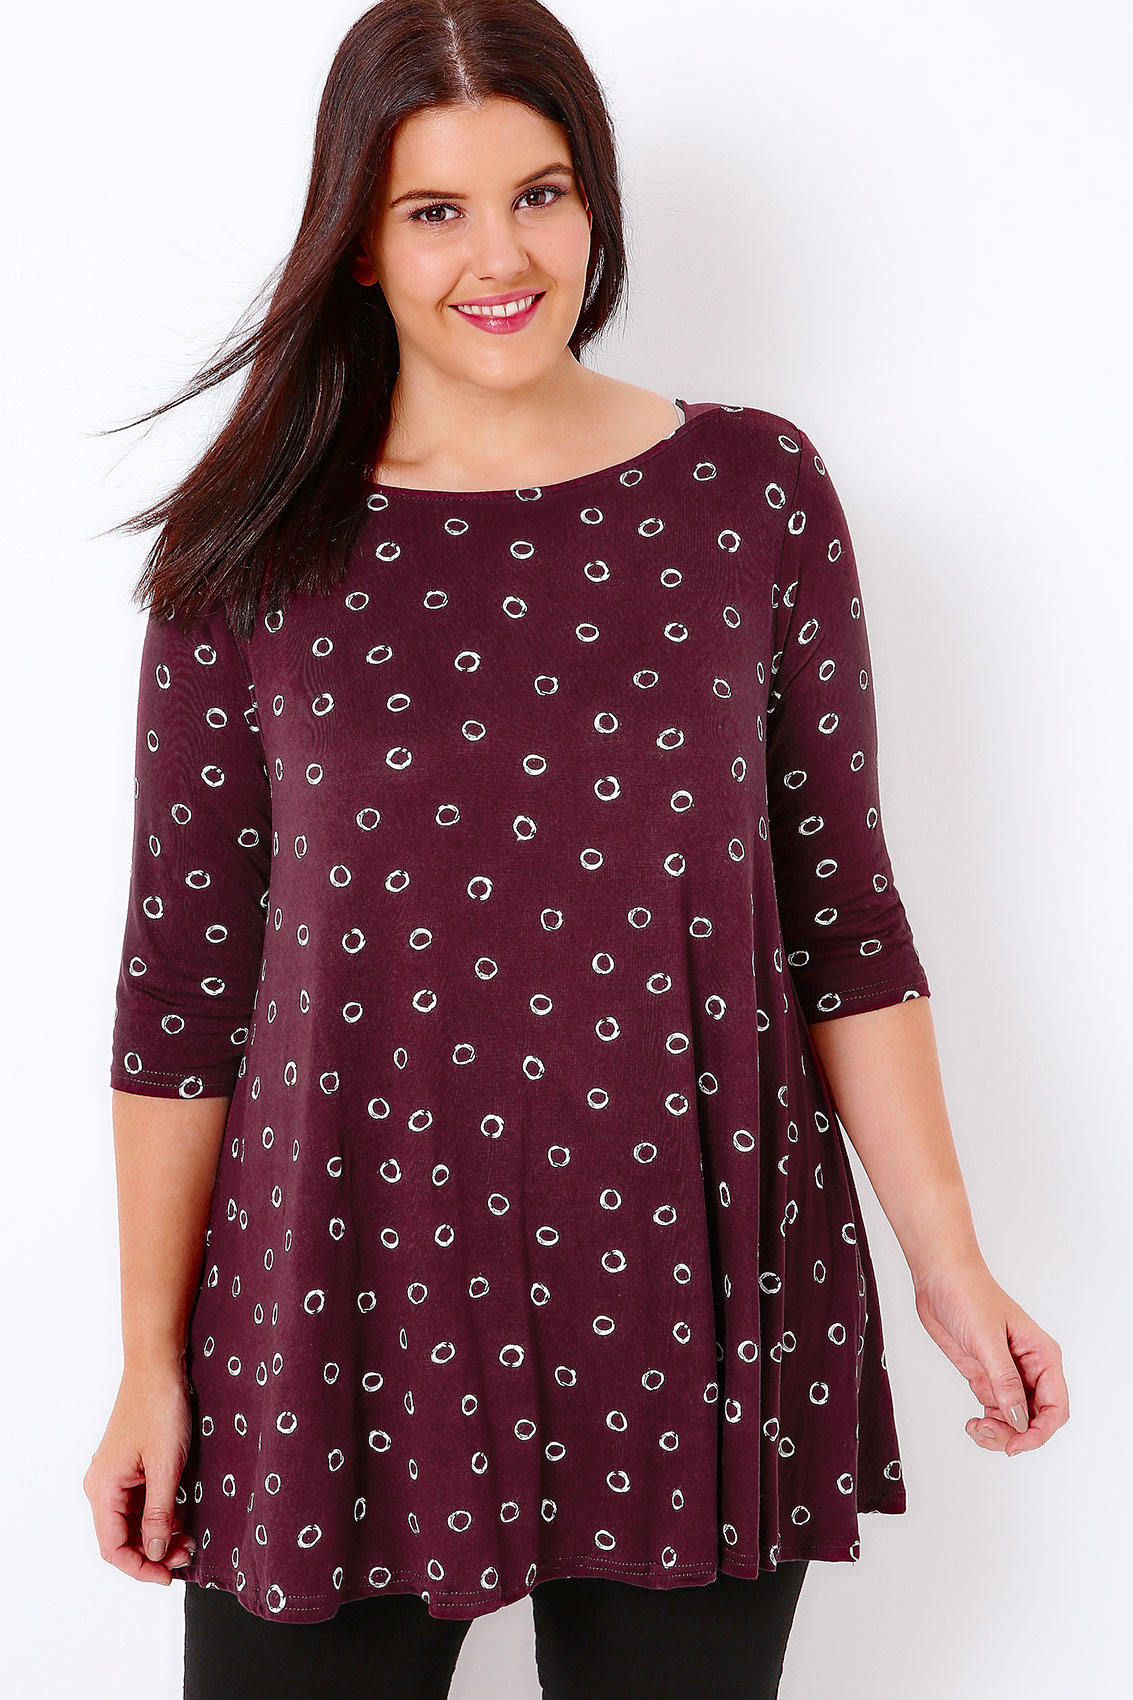 Burgundy Circle Print Top With Envelope Neckline, Plus Size 16 to 36